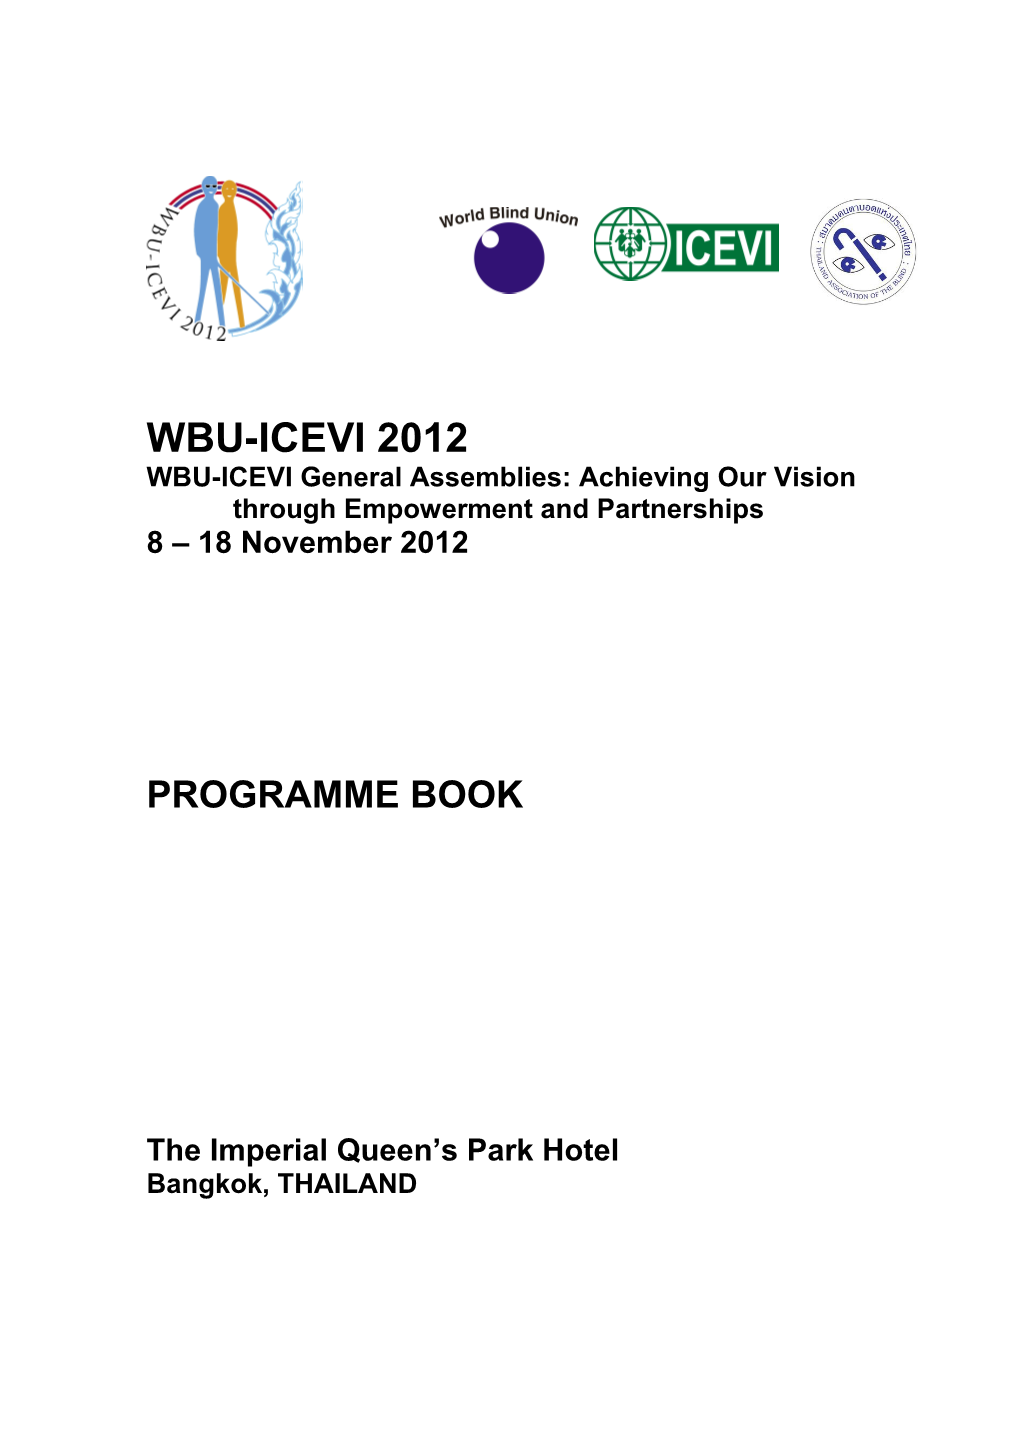 WBU-ICEVI General Assemblies: Achieving Our Vision Through Empowerment and Partnerships s1